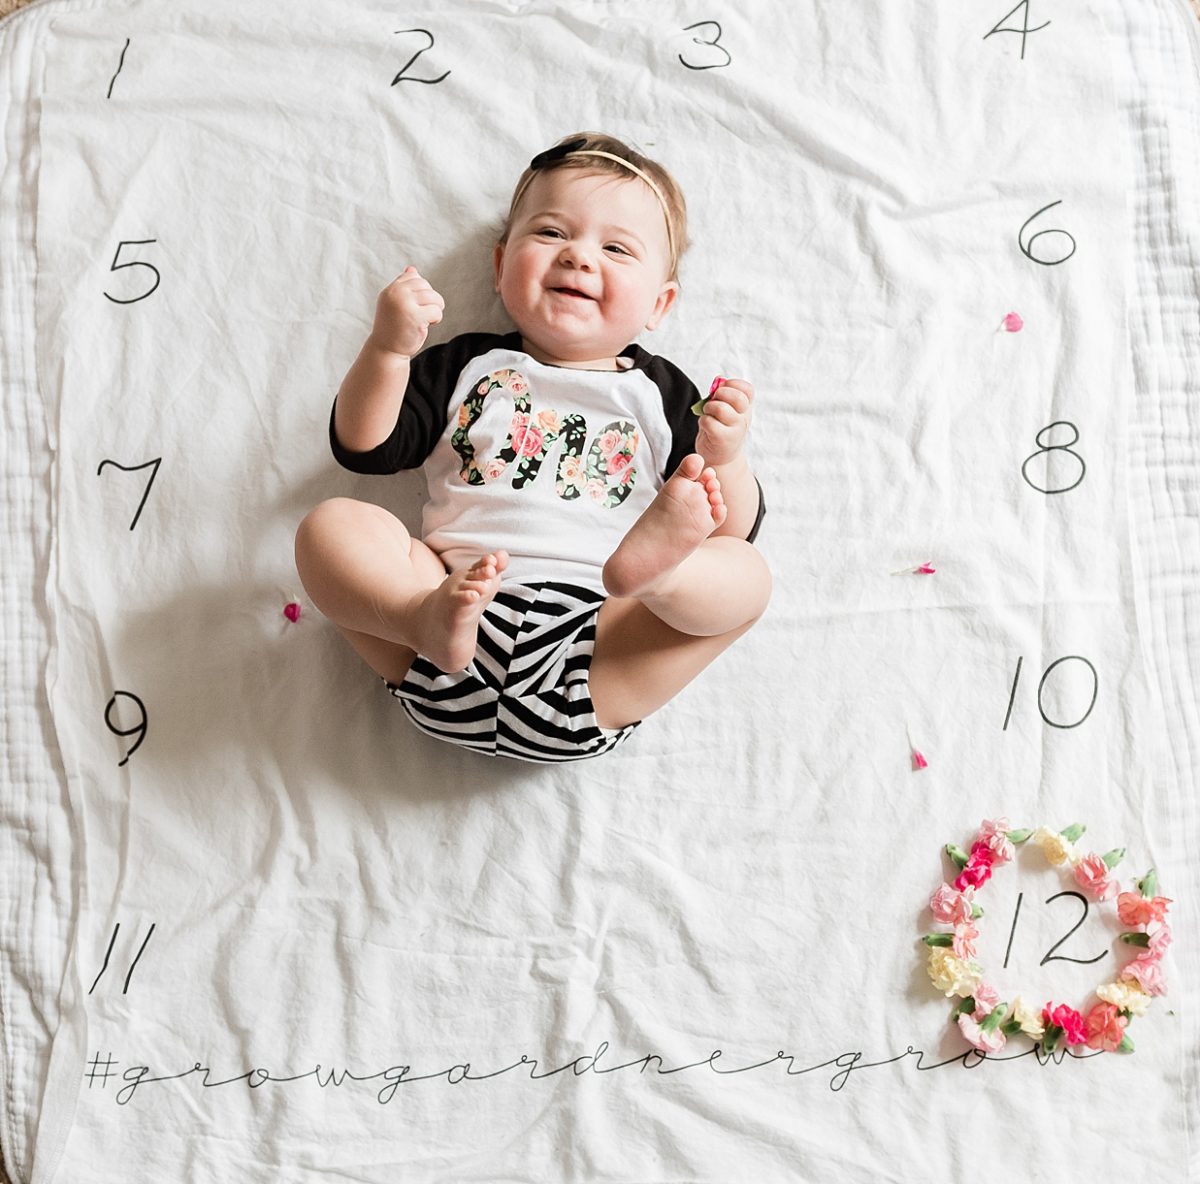 12 Months Young – Hatsy June – One Year Old